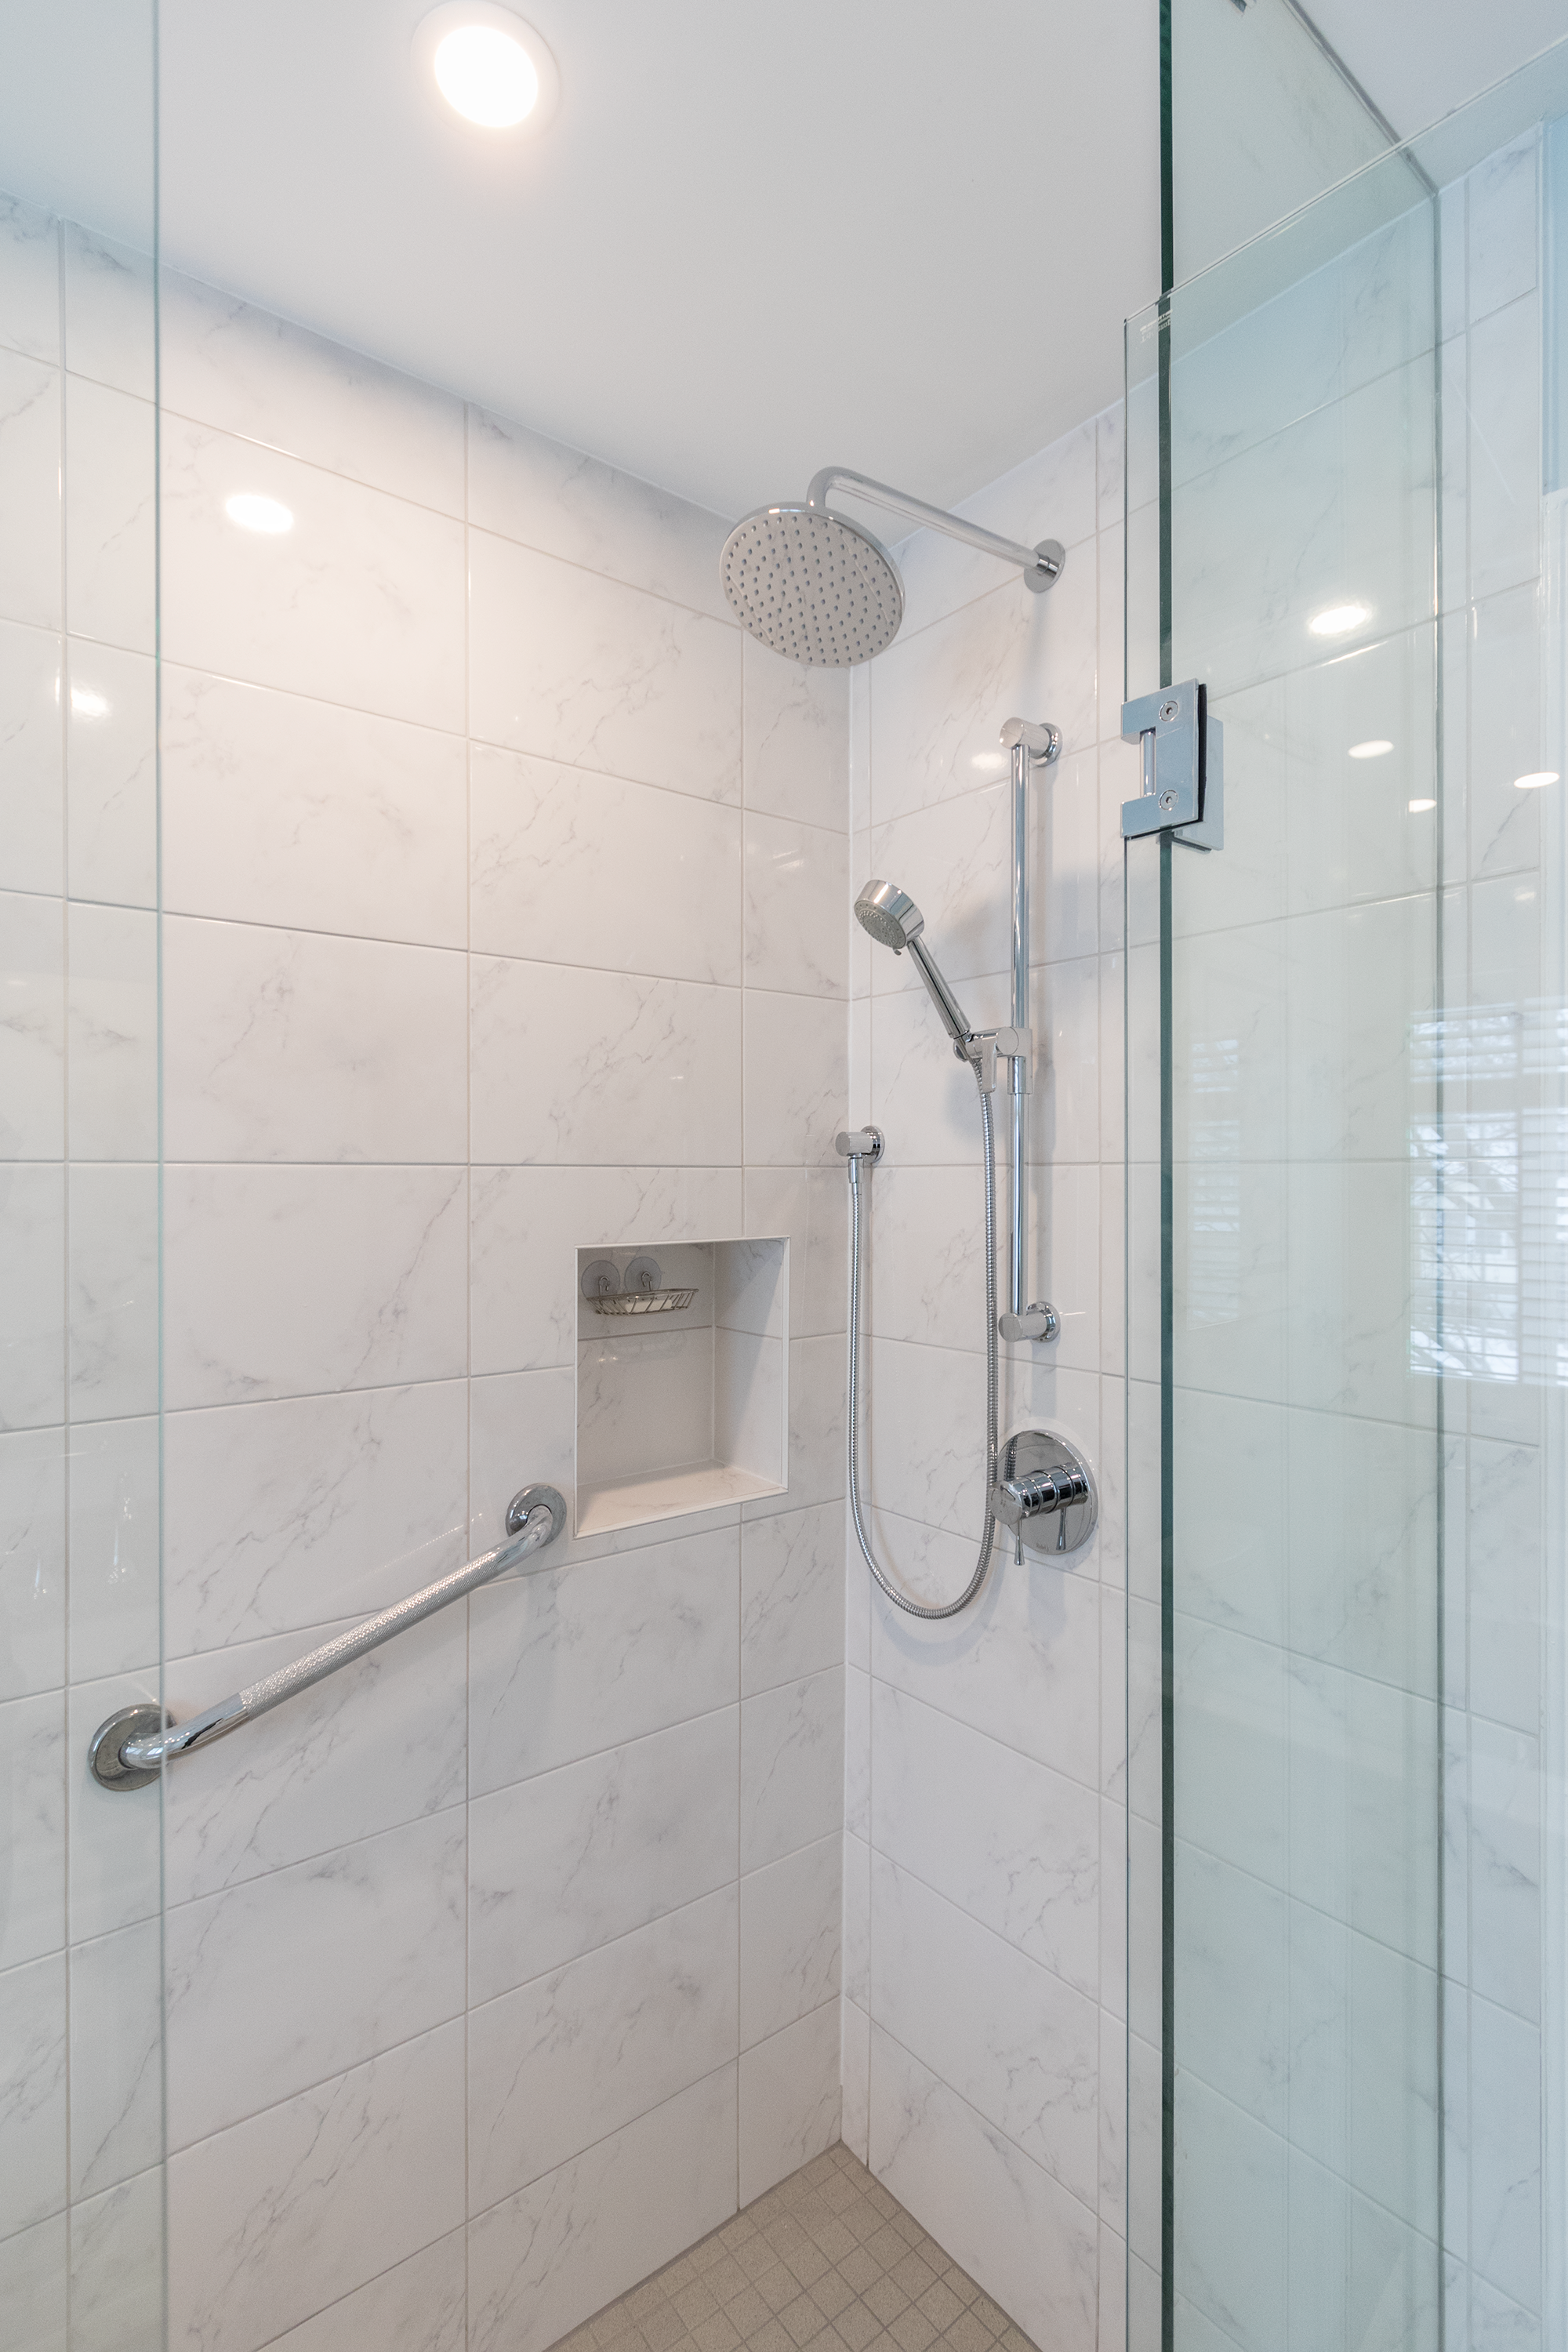 Converting Your Tub To A Walk In Shower, How To Go From Bathtub Walk In Shower